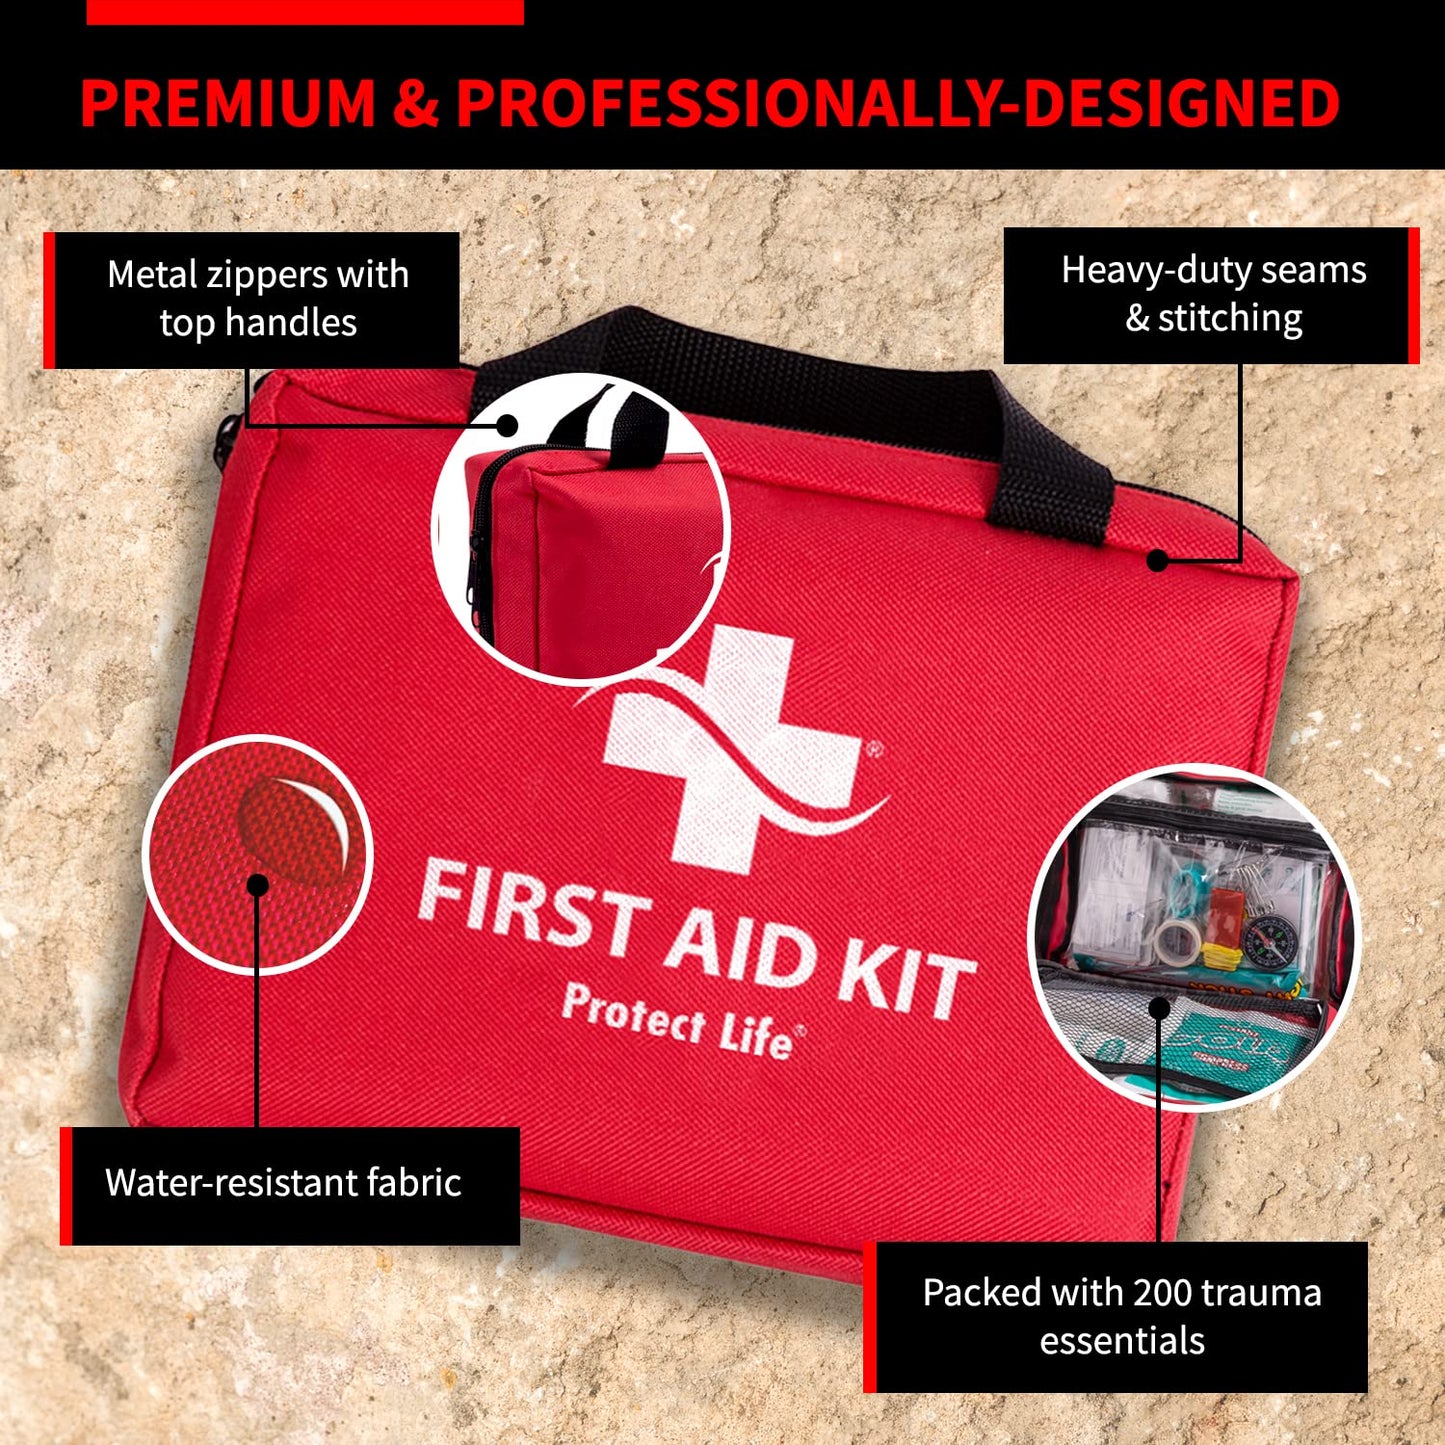 Protect Life First Aid Kit for Home/Business | HSA/FSA Eligible Emergency Kit | Hiking First aid kit Camping | Travel First Aid Kit for Car|Small First Aid Kit Travel/Survival Medical kit - 200 Pieces